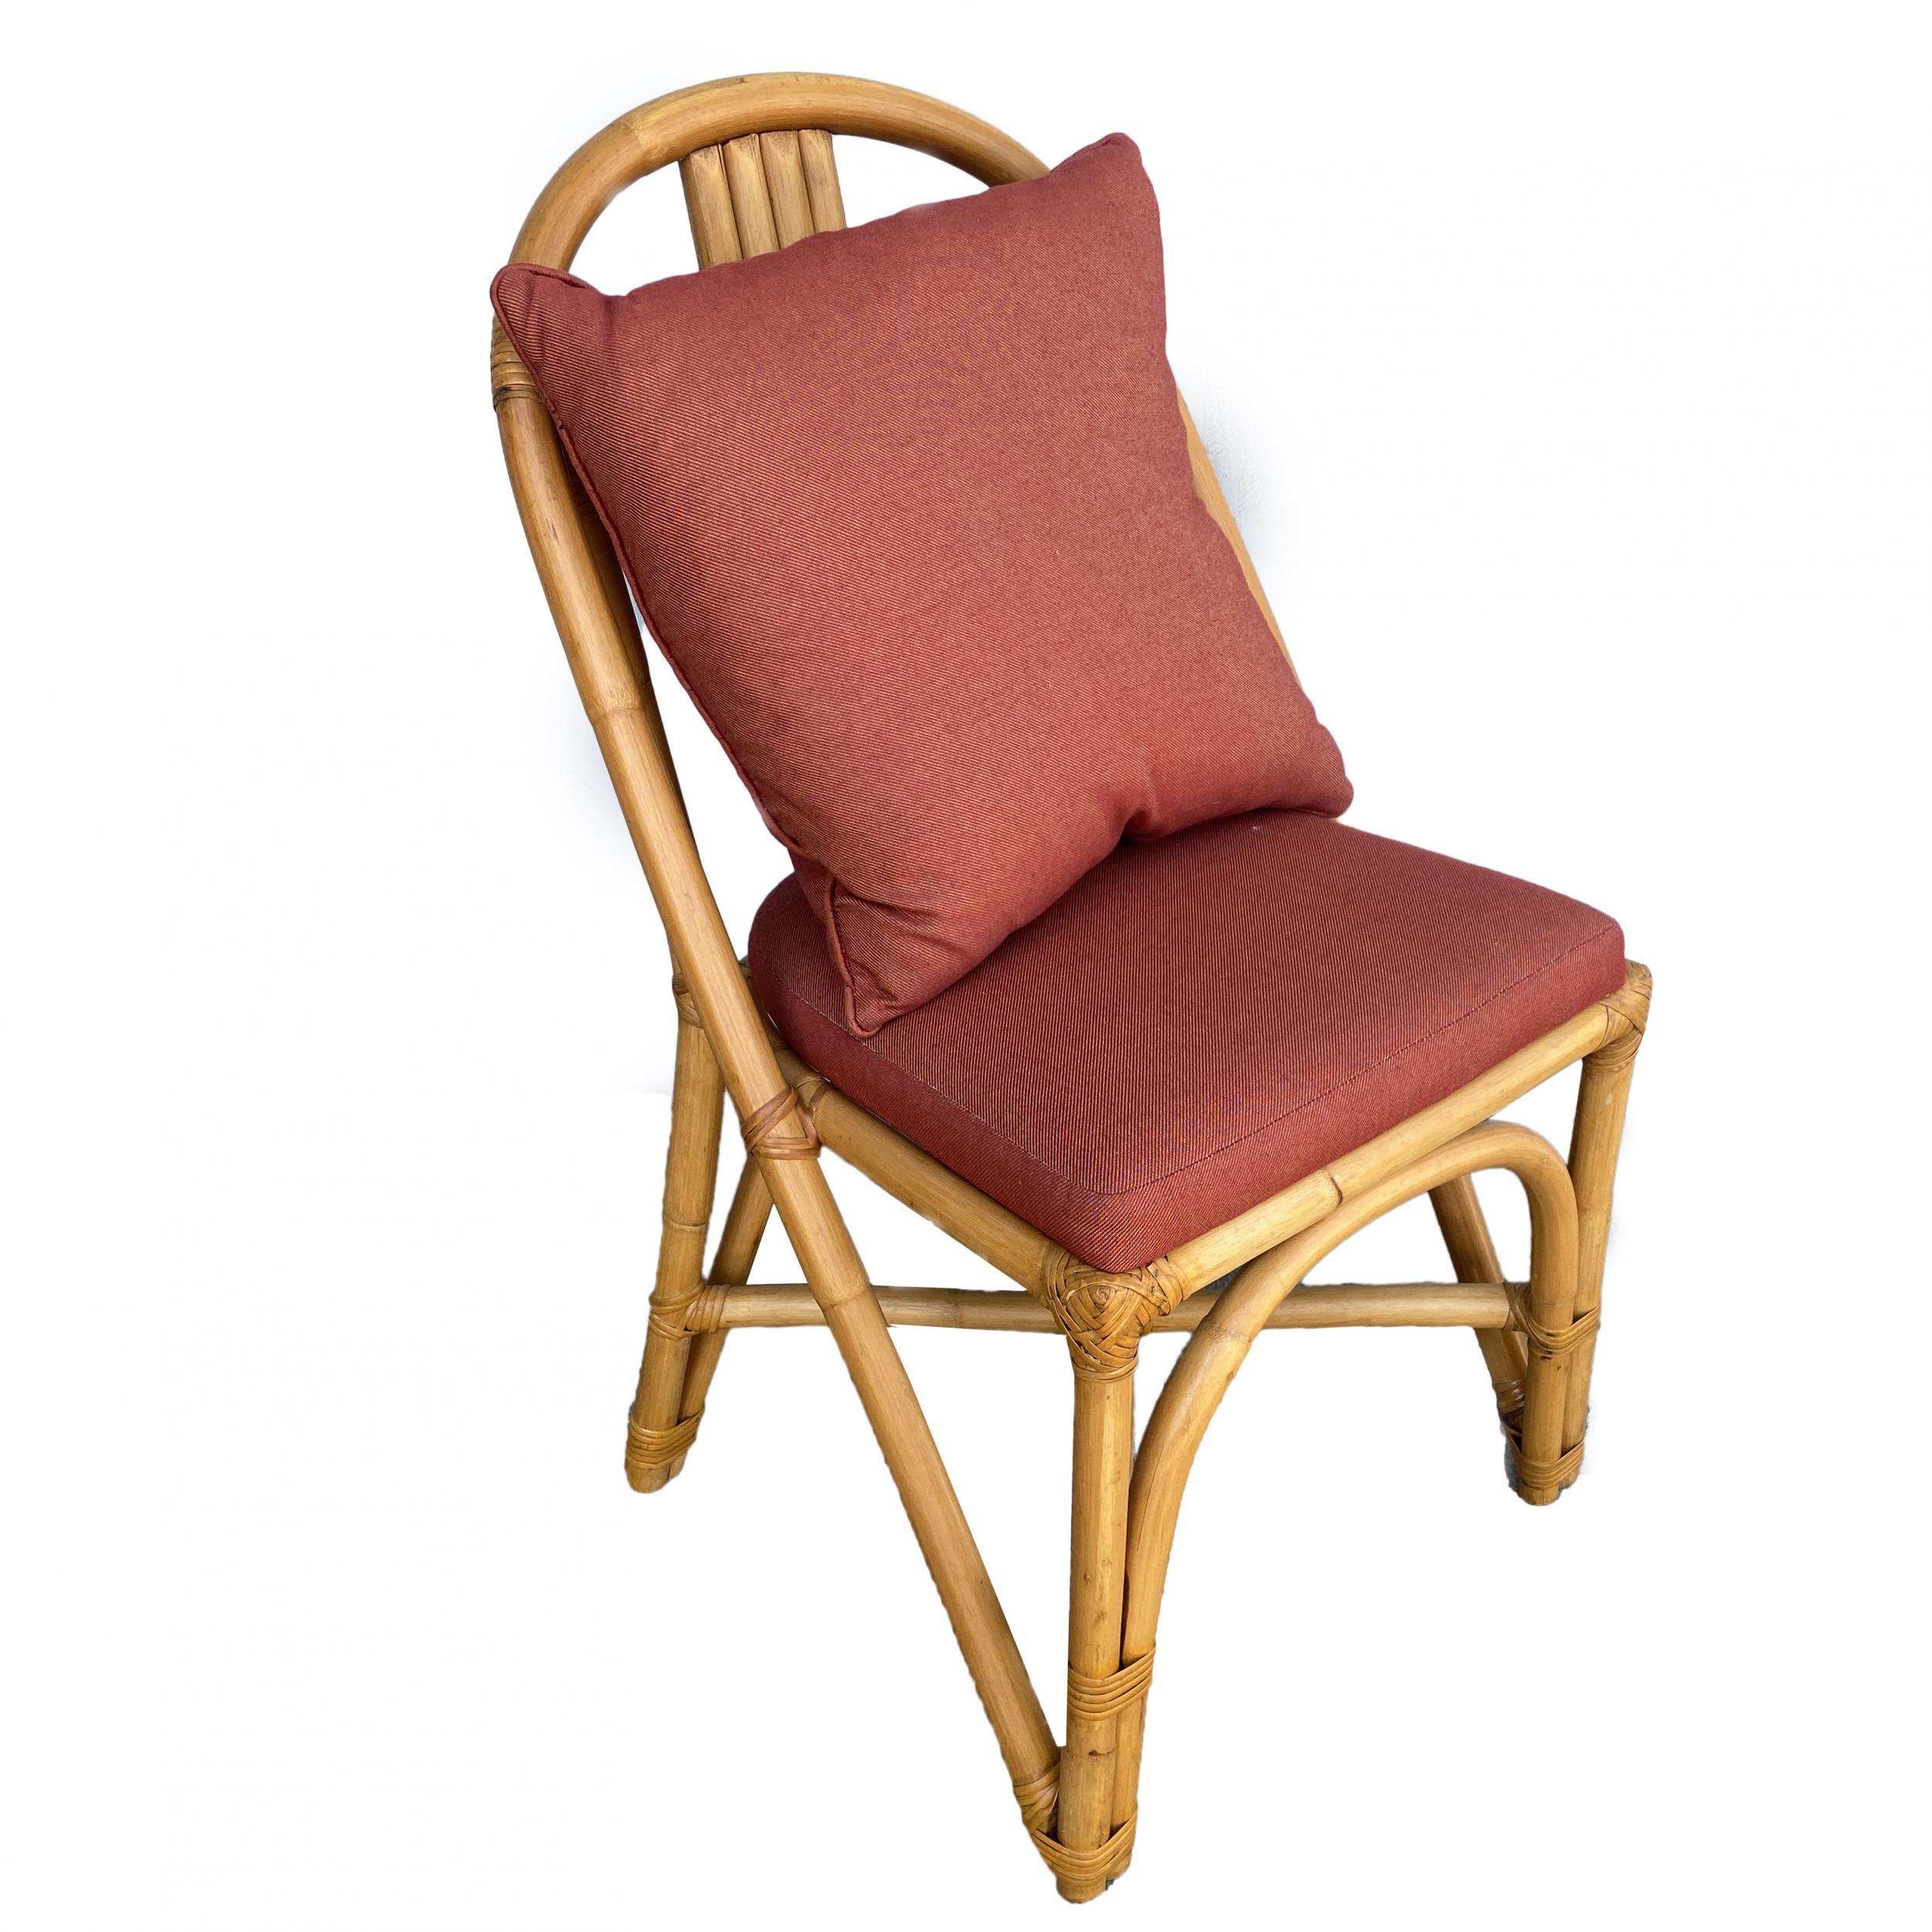 Vintage rattan dining room side chair with red padded seat, included is a set of fix chairs. Each chair features a pole rattan frame back with red upholstery seat and pillow style back seat.

Cushions made to order included. The cushions pictured